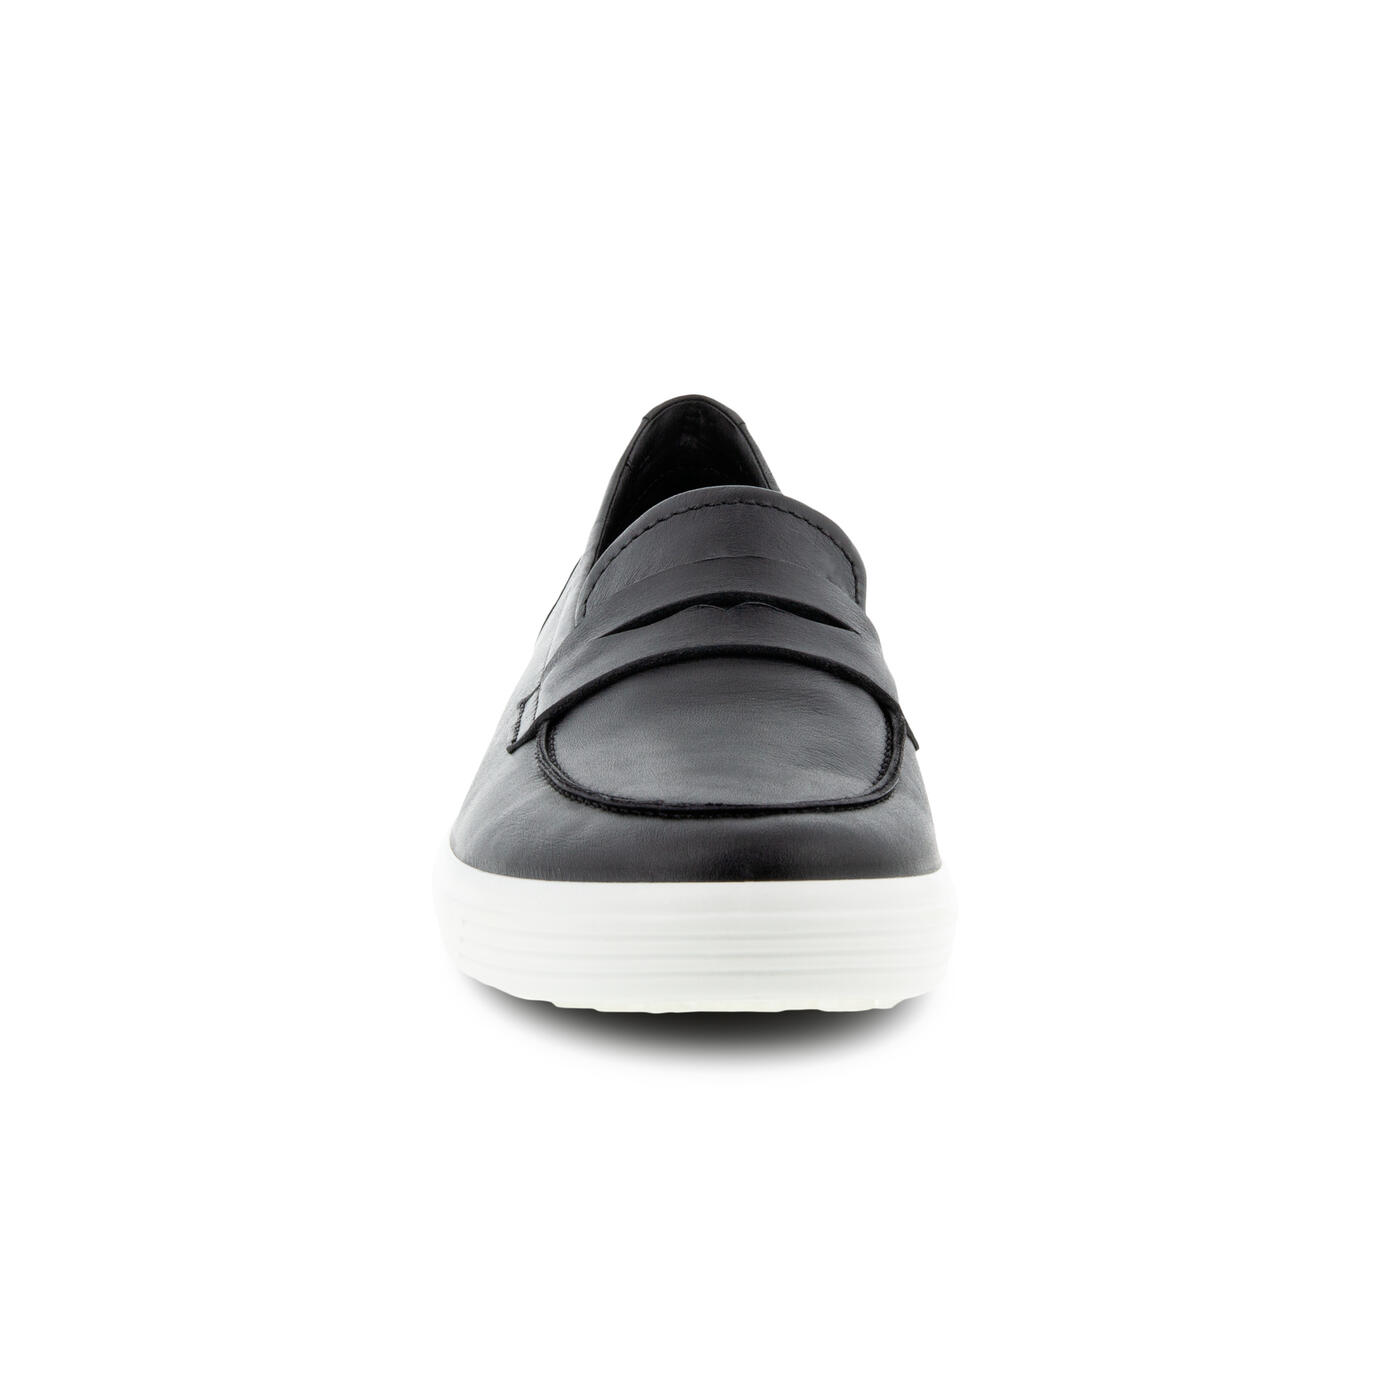 Women's Soft 7 Loafers | ECCO® Shoes